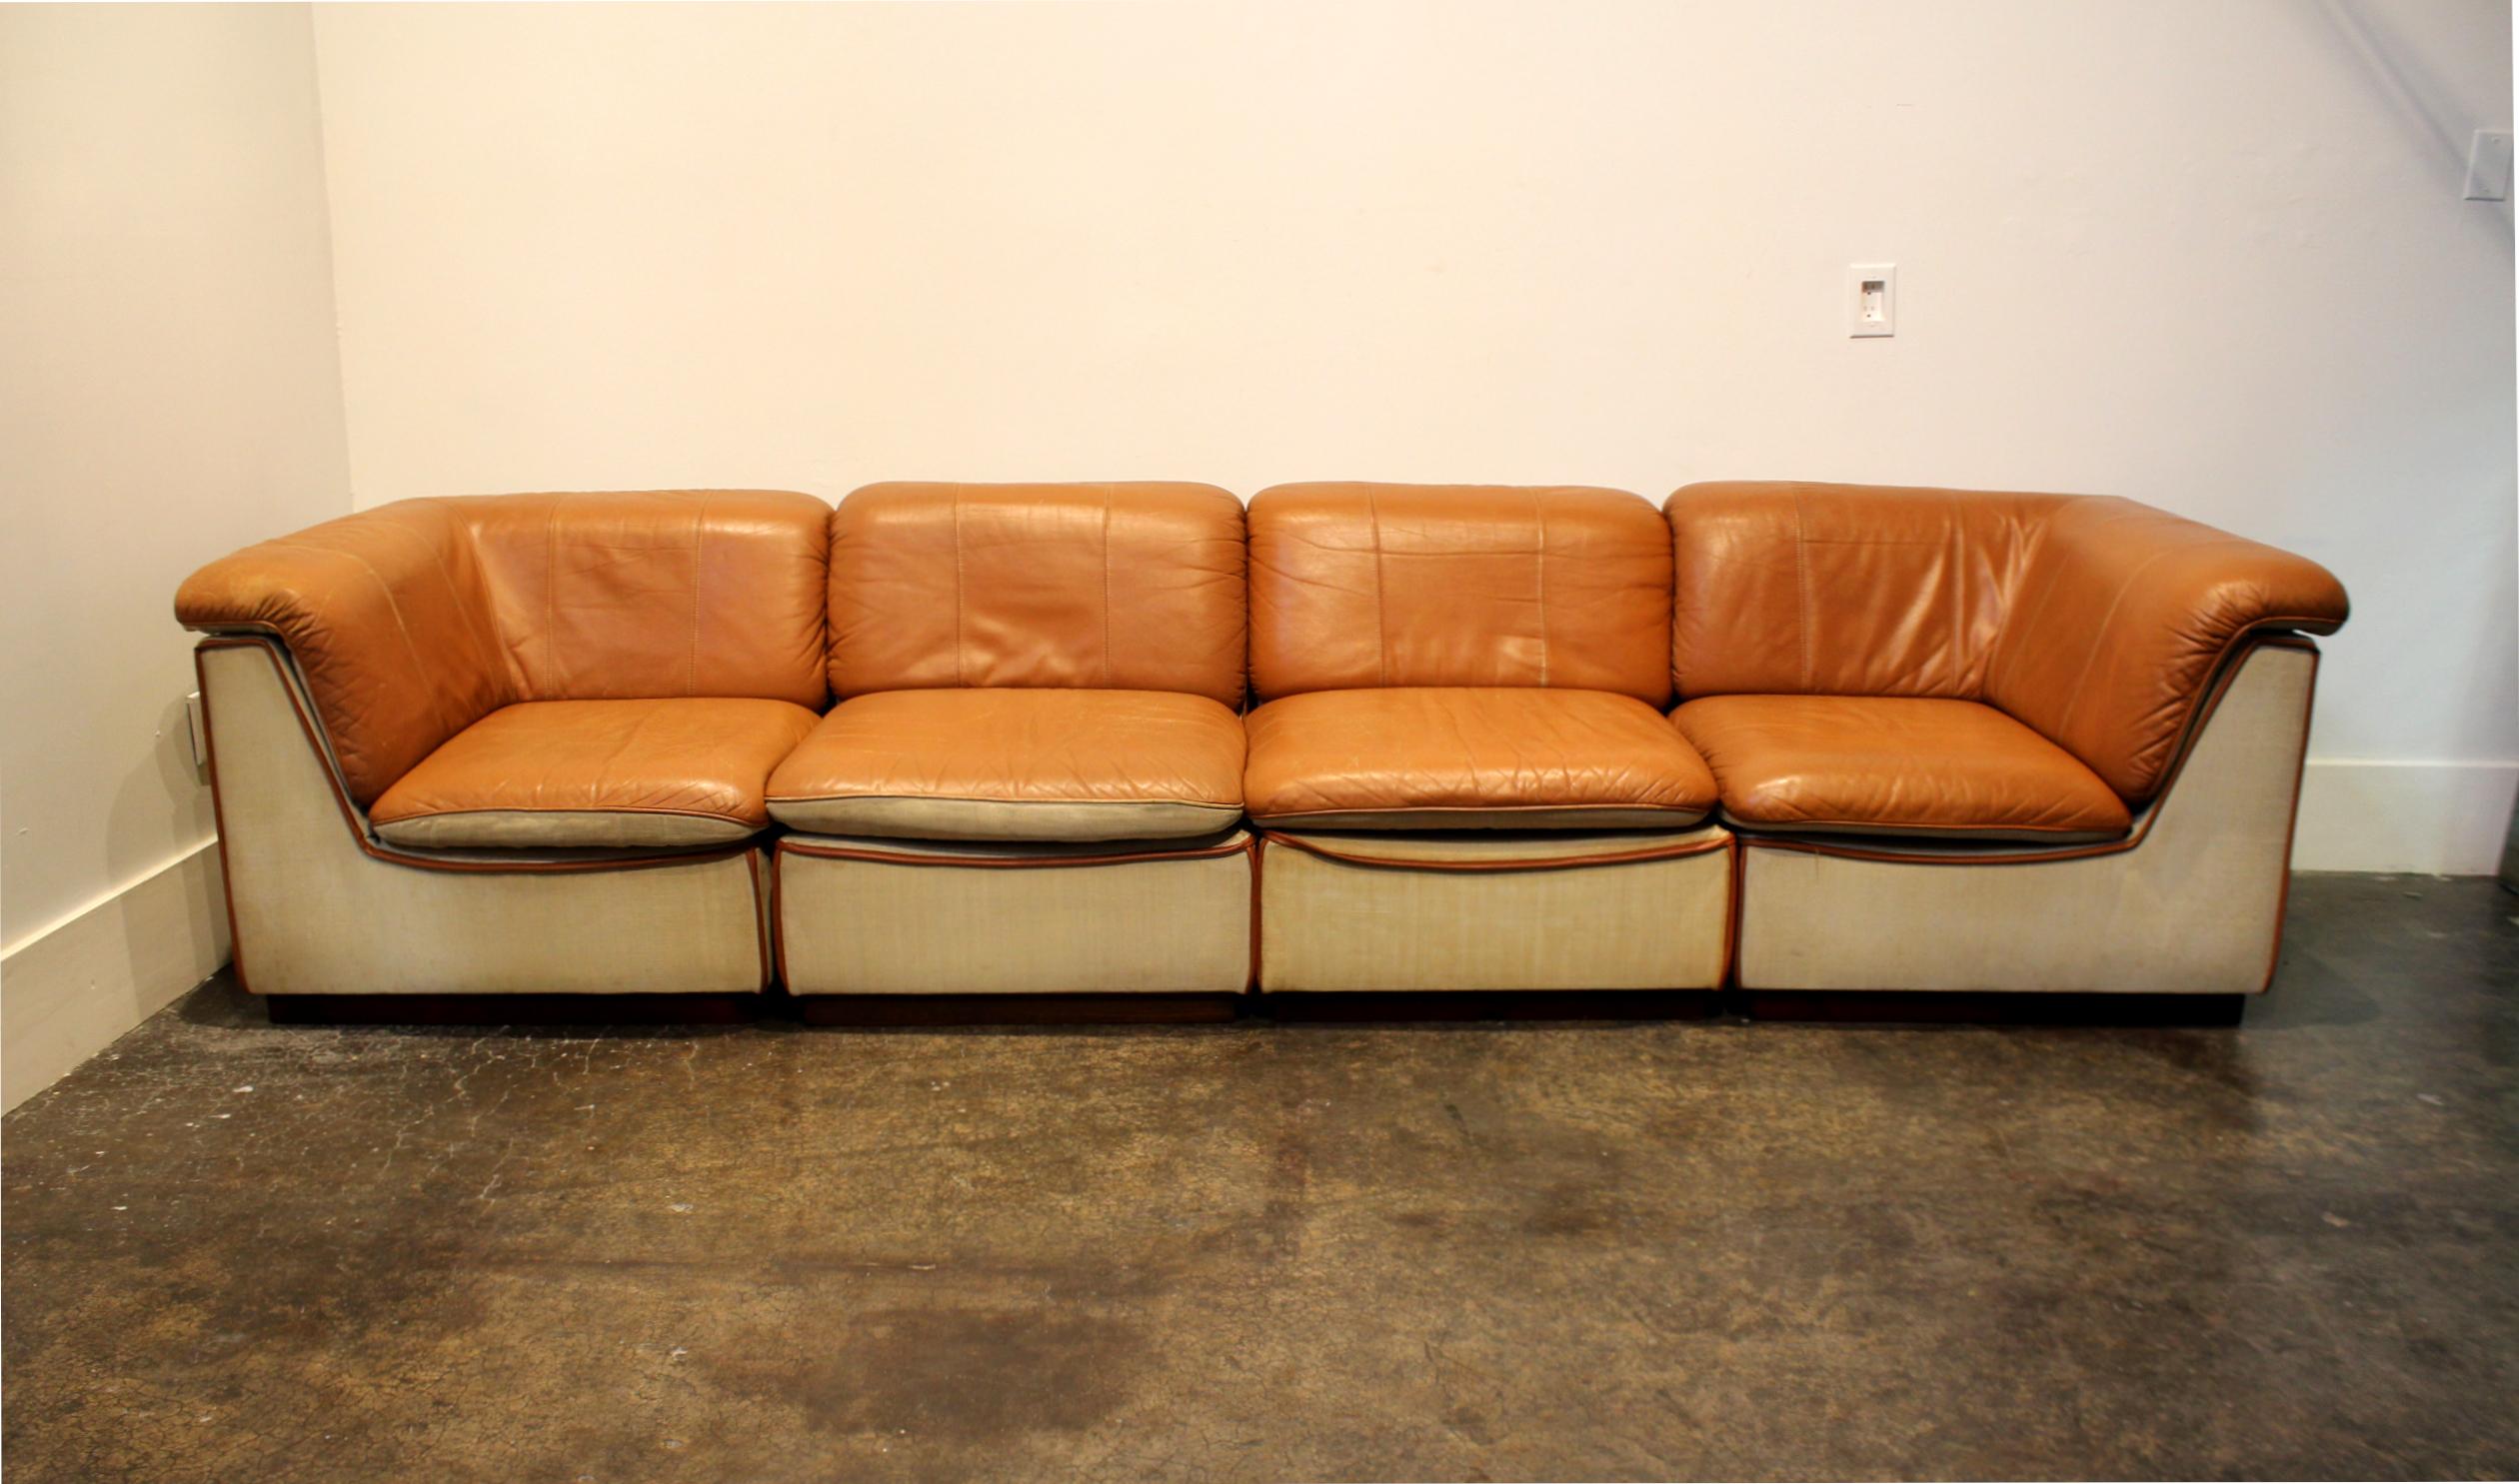 Massive and endlessly changeable modular sofa composed of two corner pieces, two side pieces and one ottoman on metal casters. Cognac/tan leather tops with linen sides raised on walnut wood plinths. Total length is over 10 feet. Same model (possibly